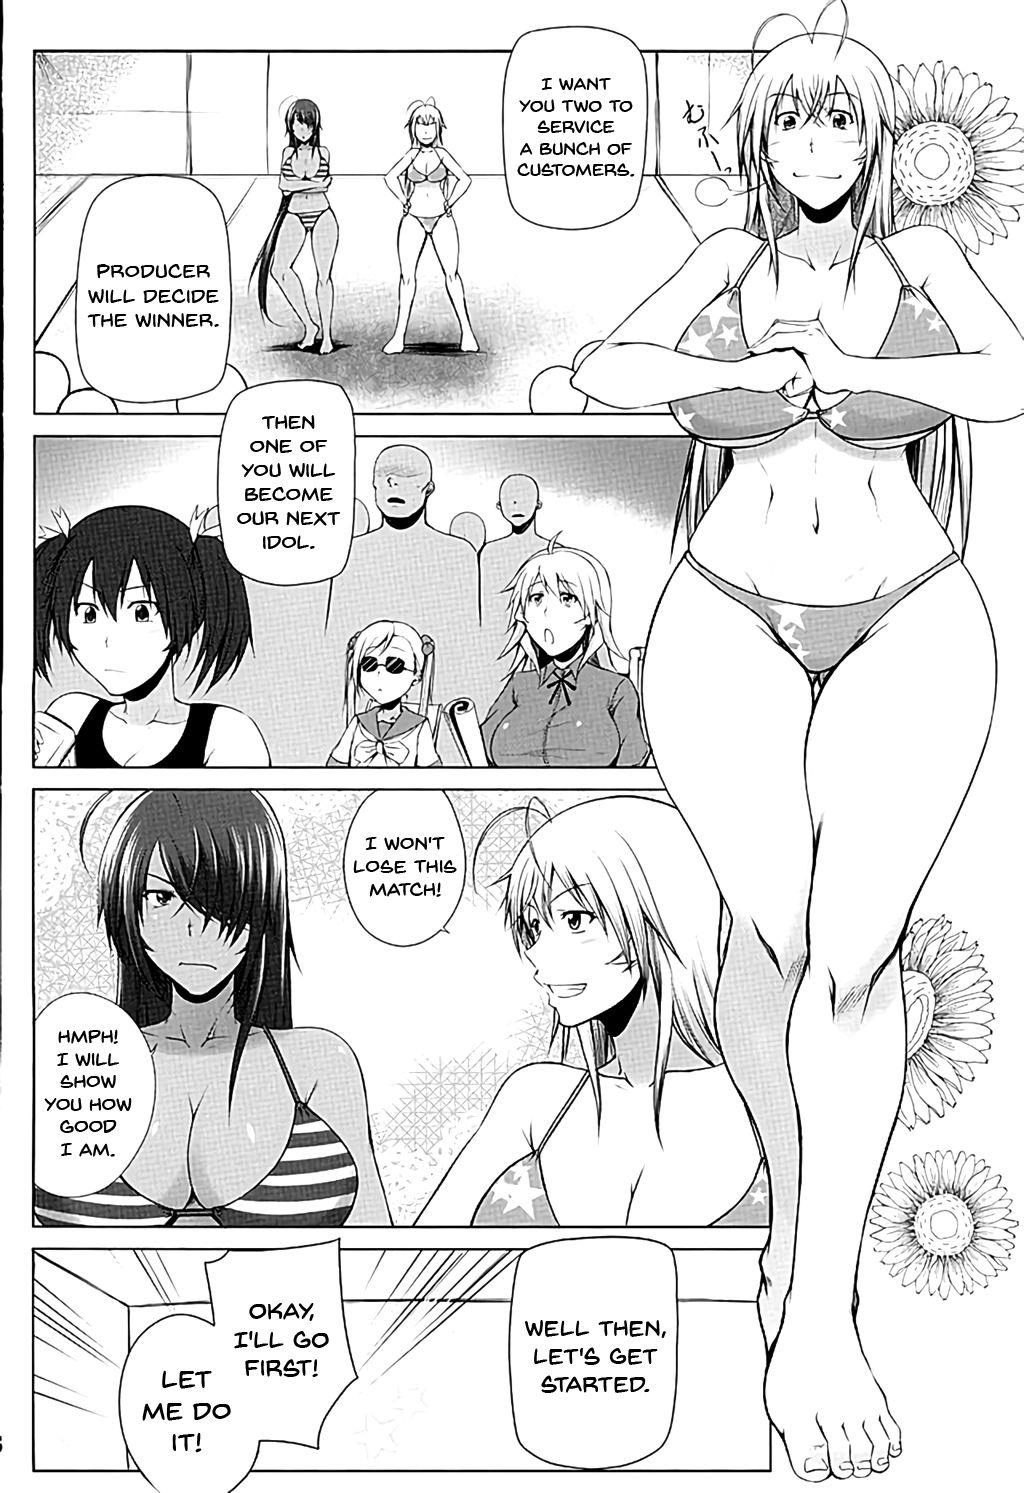 Jock H na Omise no Toku A Toushi Go&Shock | A Special A Rank Fighter At The H Shop Go&Shock - Ikkitousen Sapphicerotica - Page 7